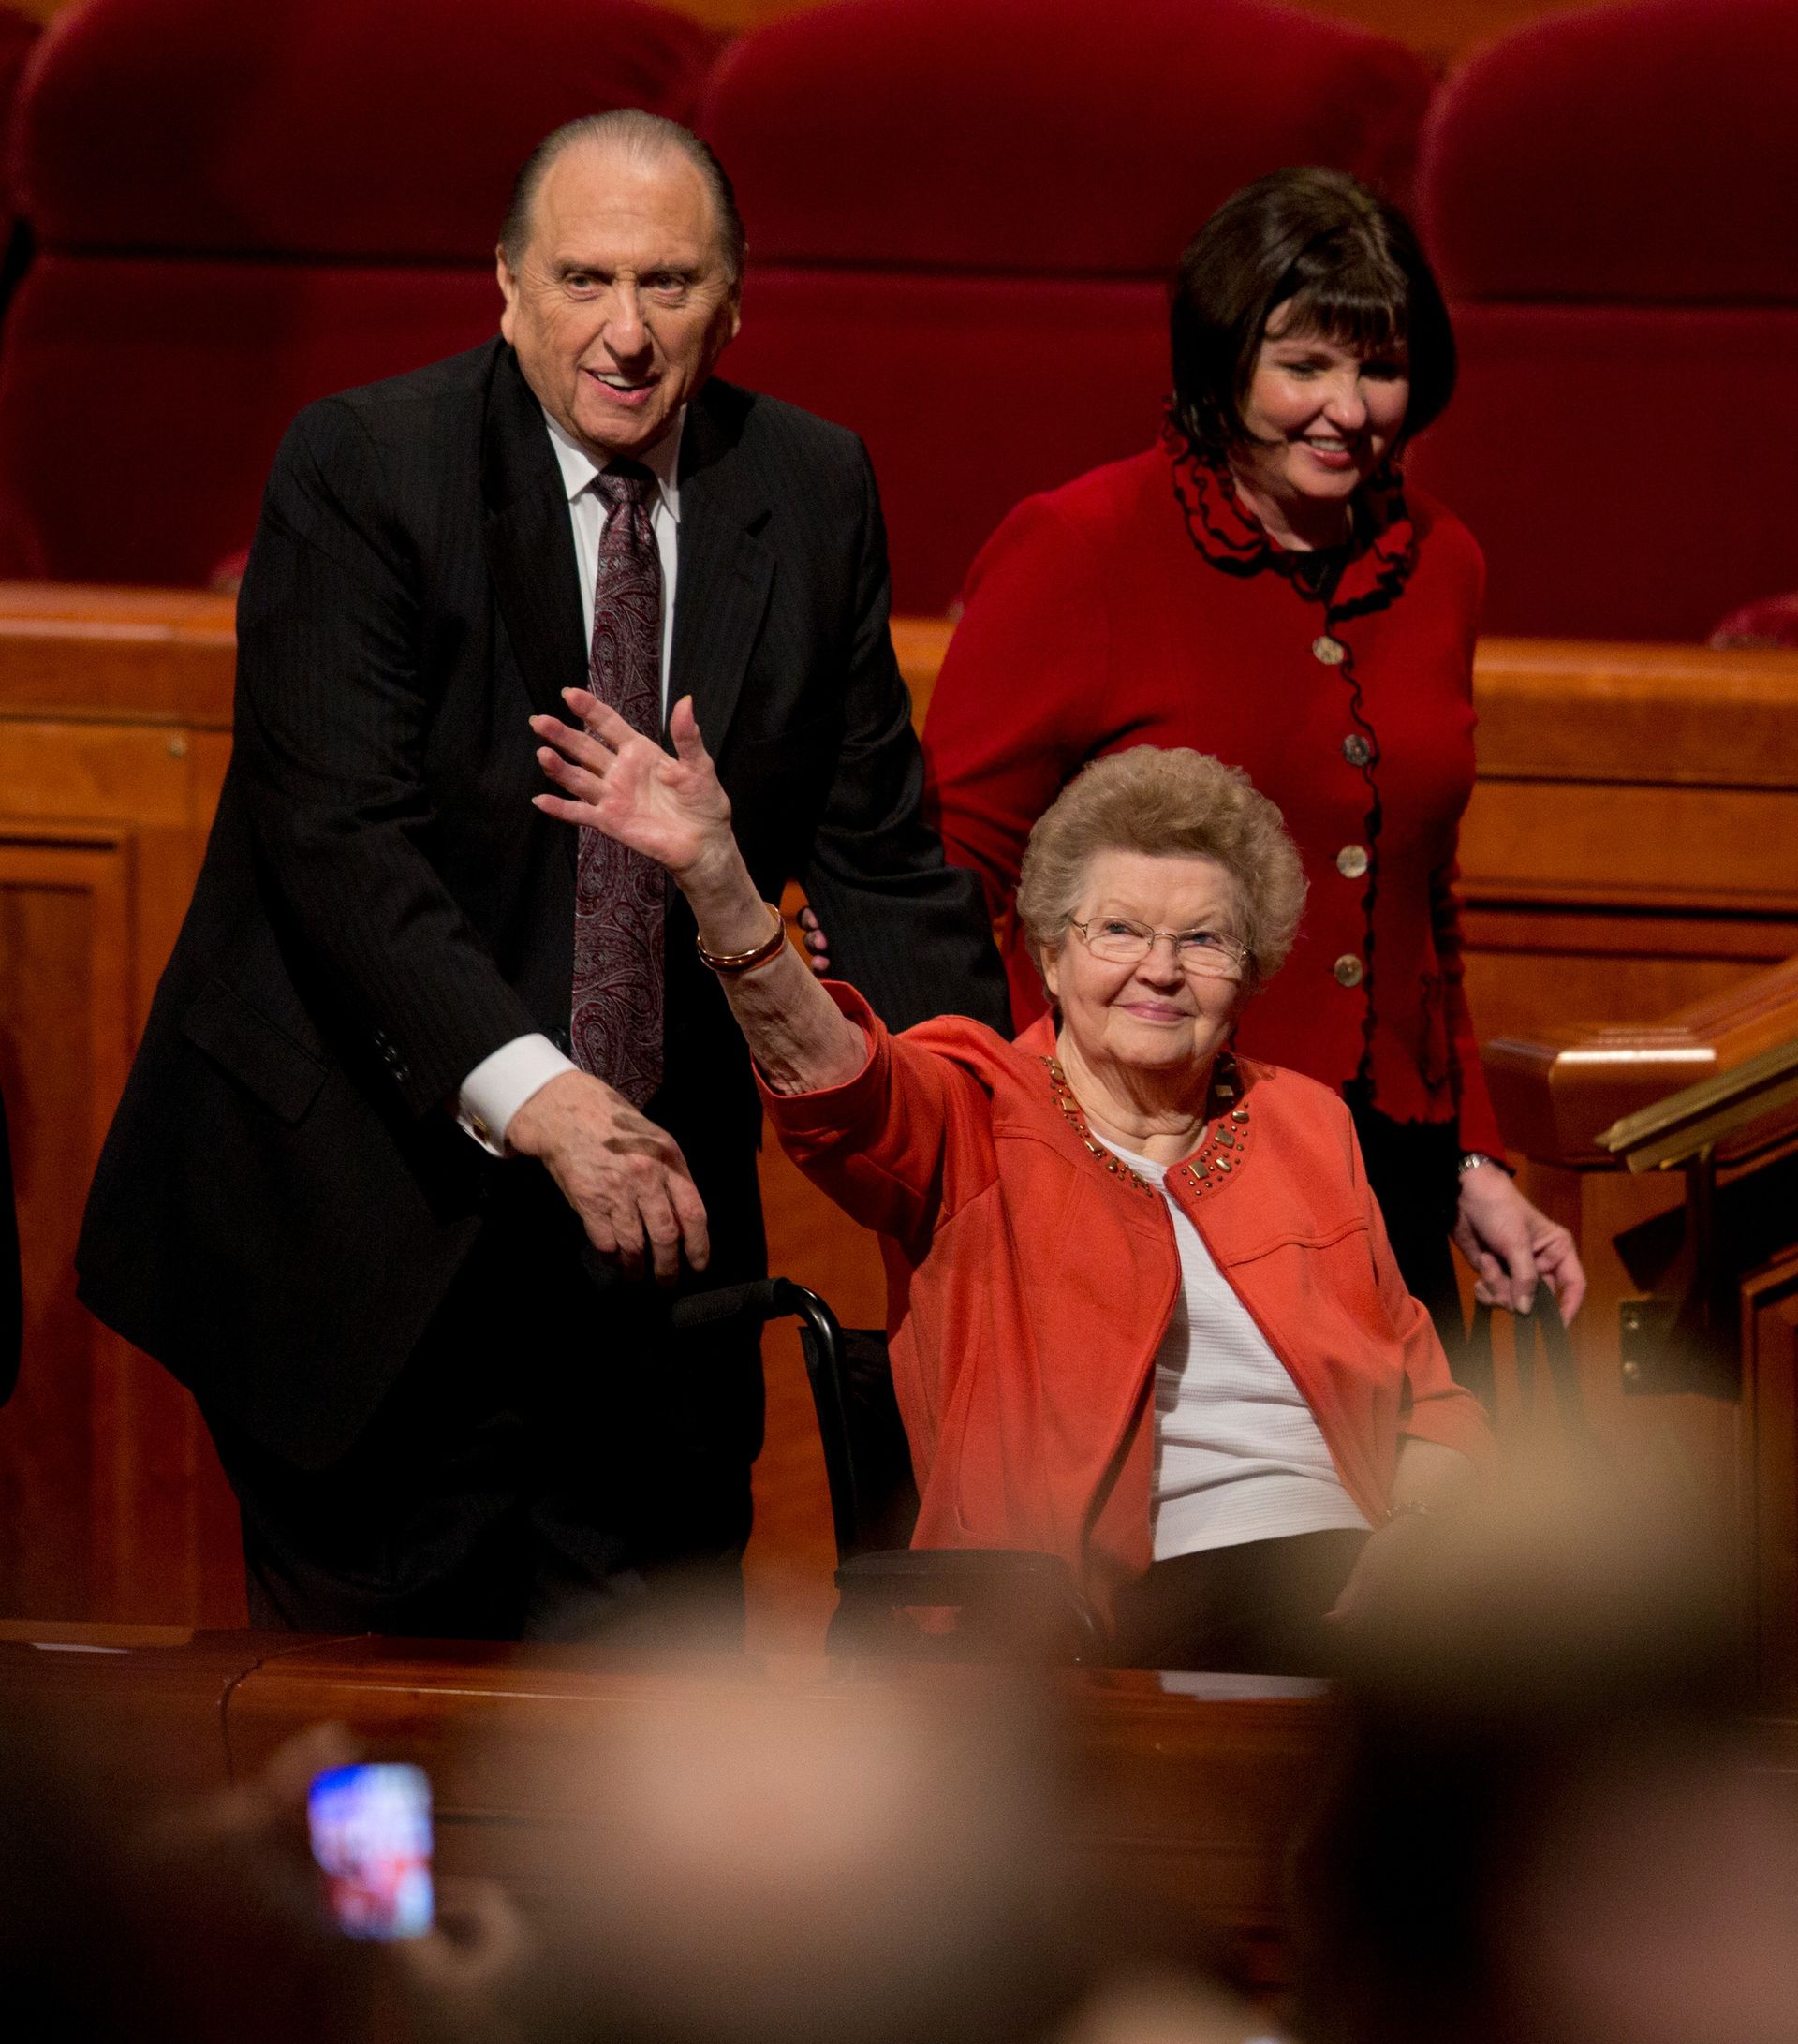 Thomas S. Monson exits the Conference Center with his wife, Frances, and daughter, Ann.